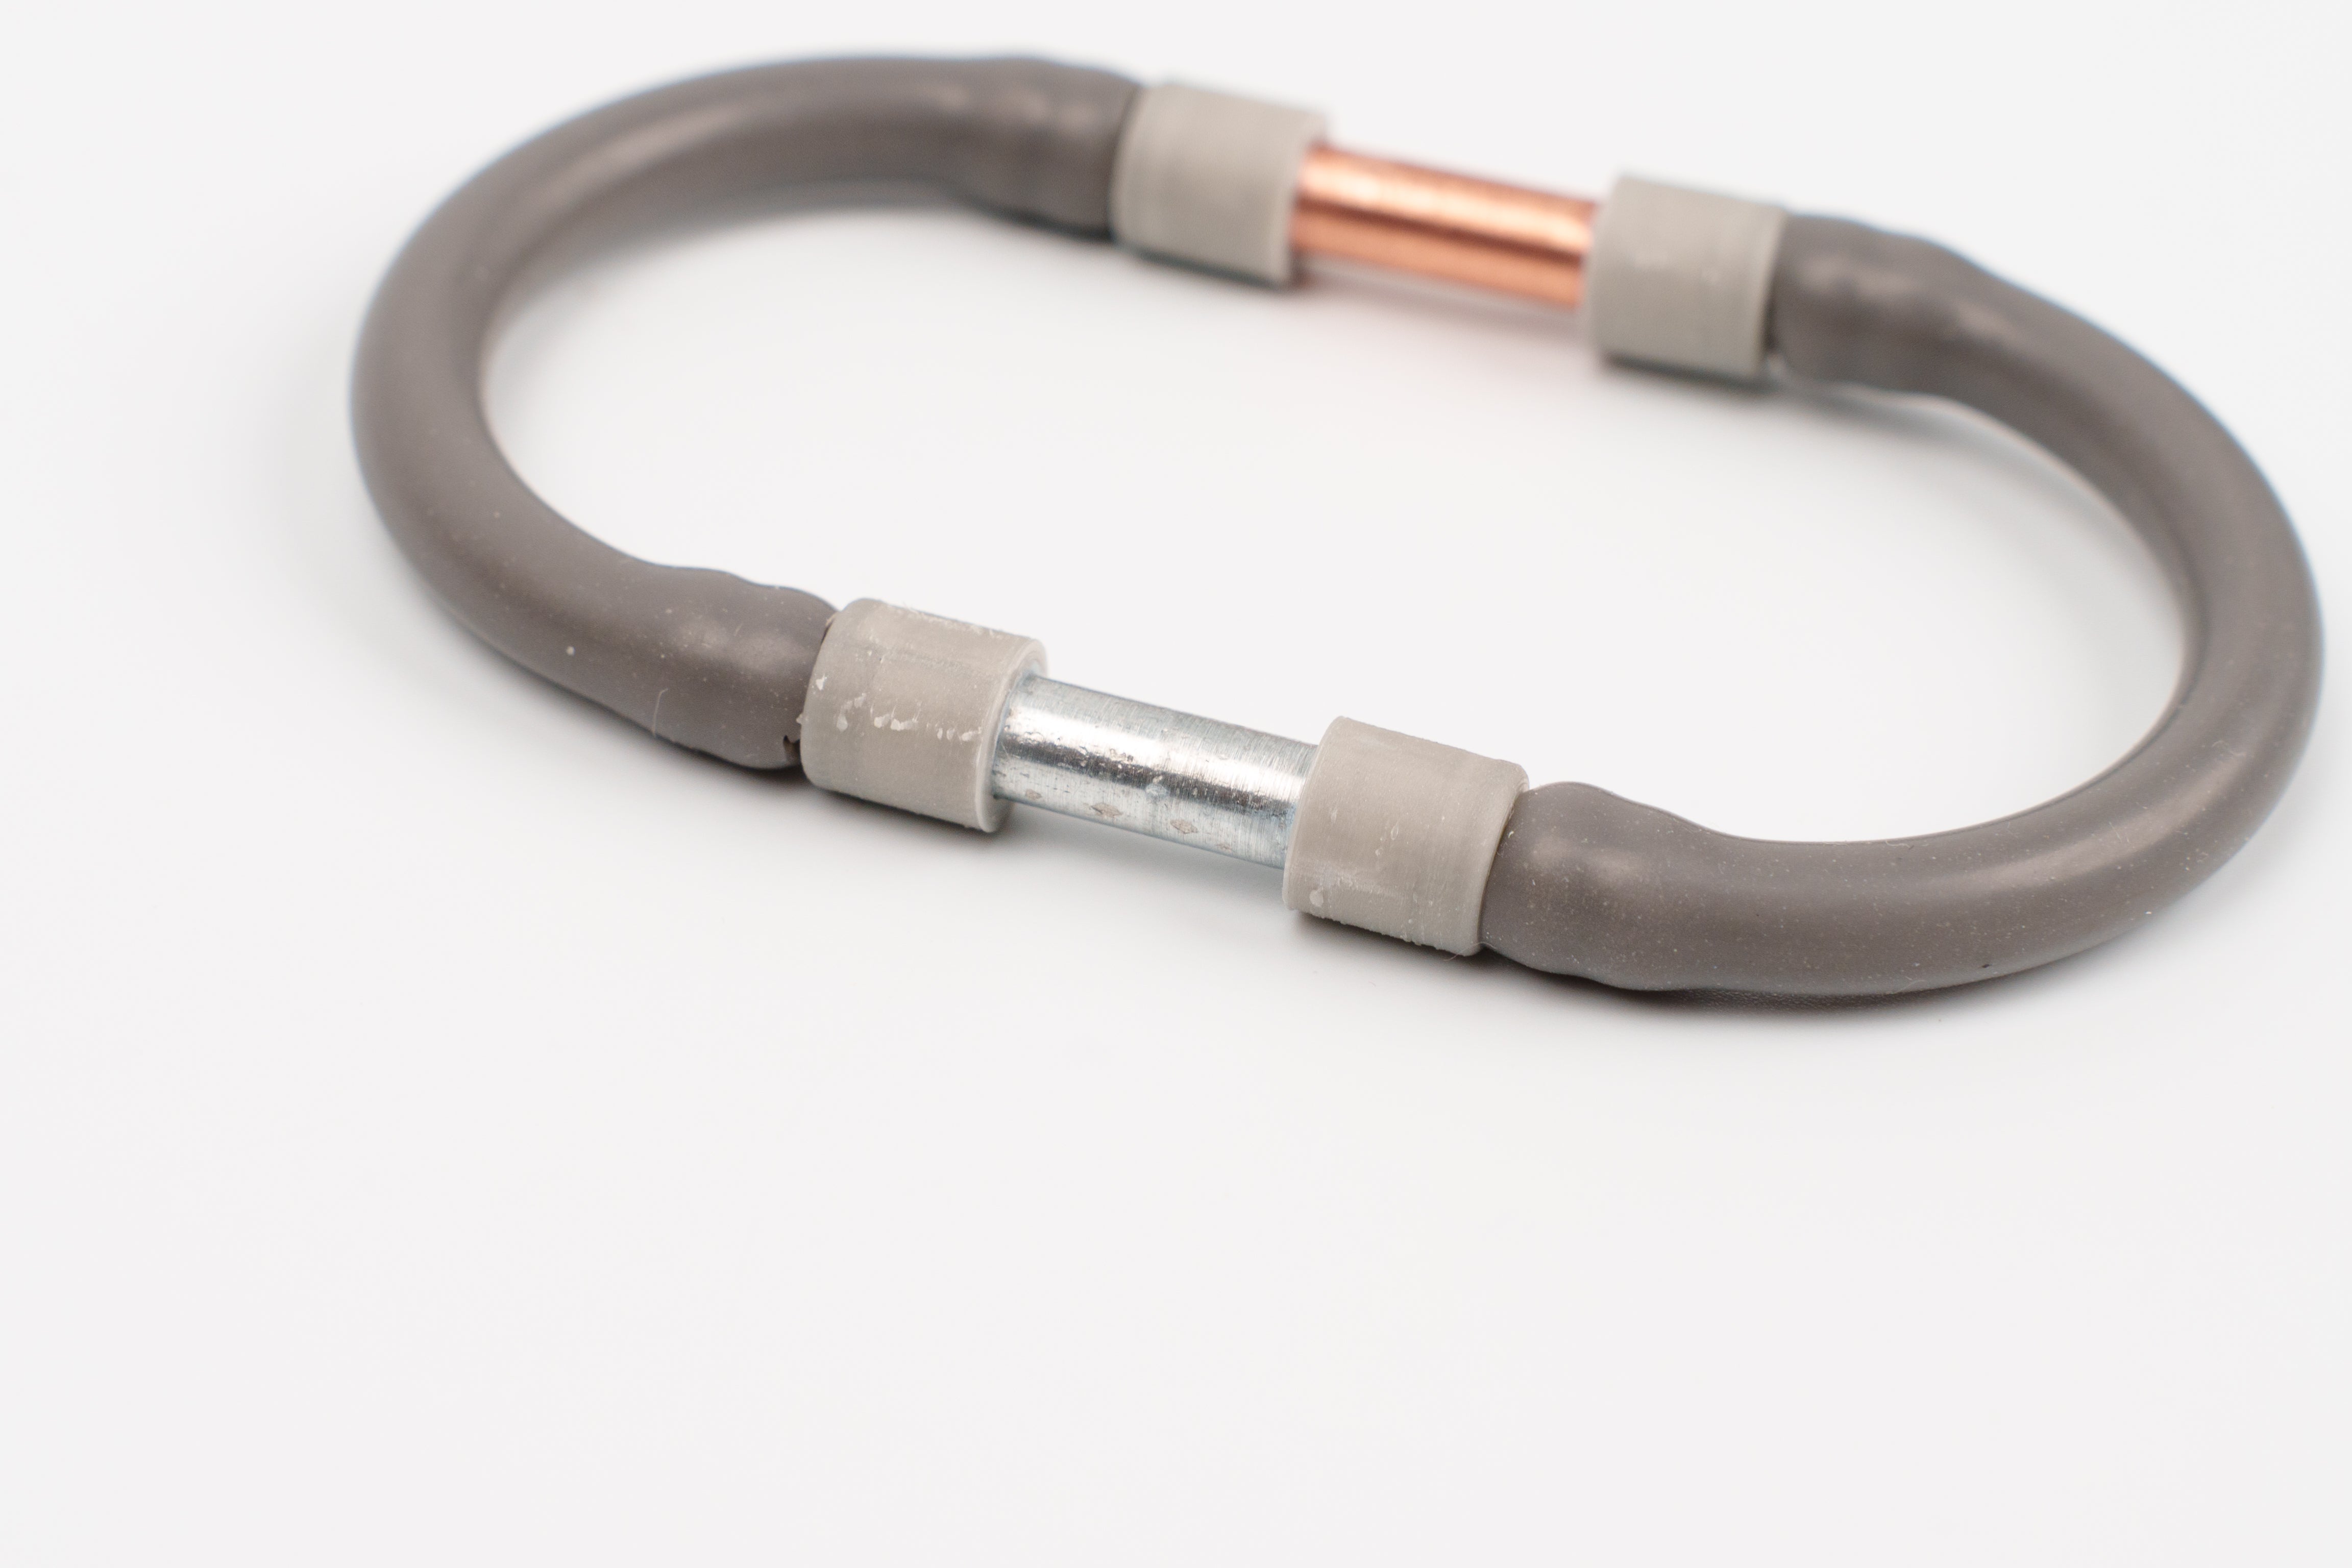 Magnetic Penisring 2.5 to increase bloodflow